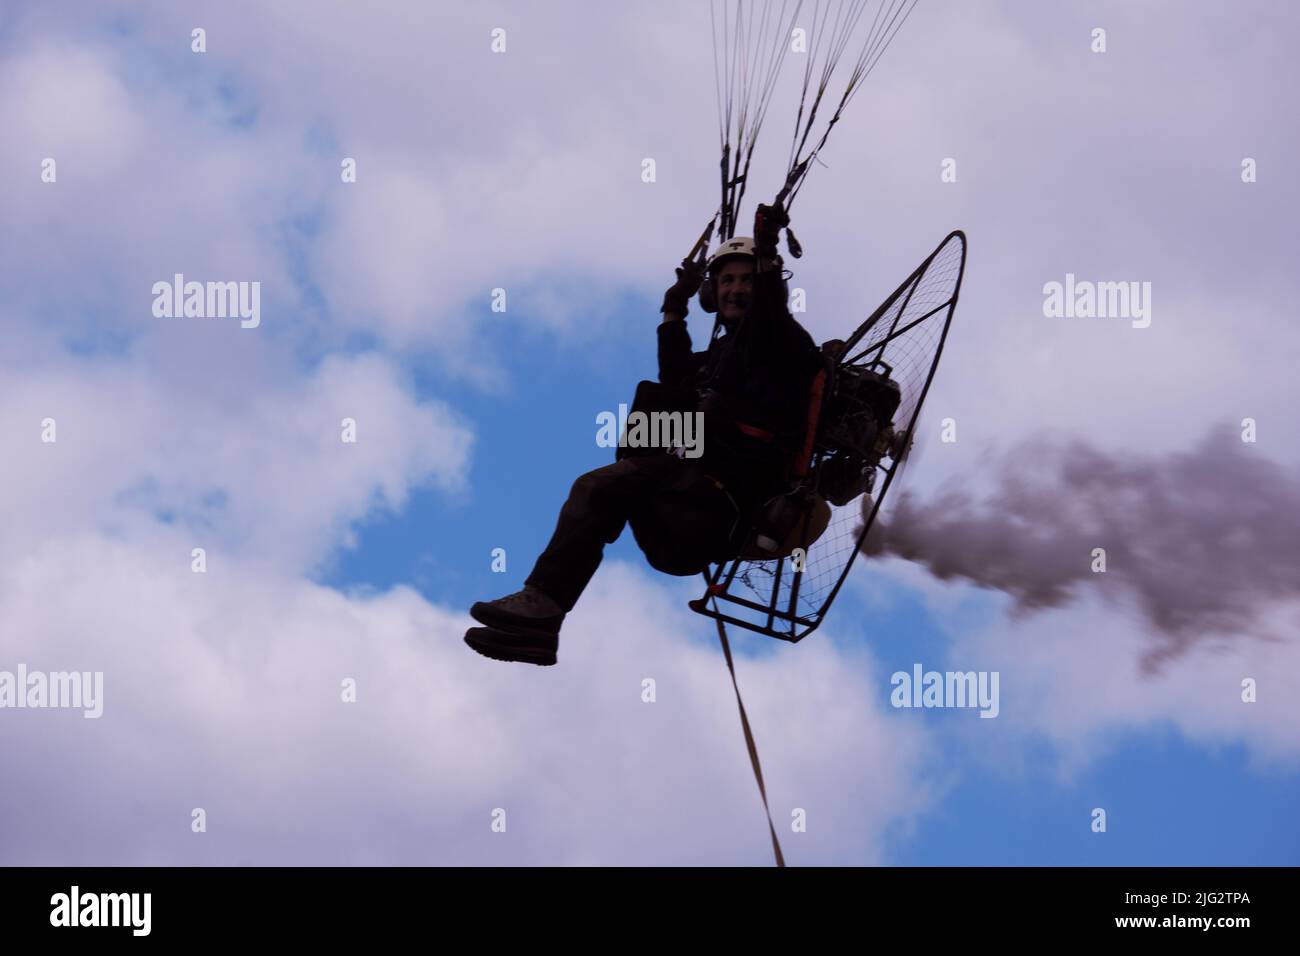 Parachute pilot flying with engine at a cloudy weather with smoke at the back Stock Photo